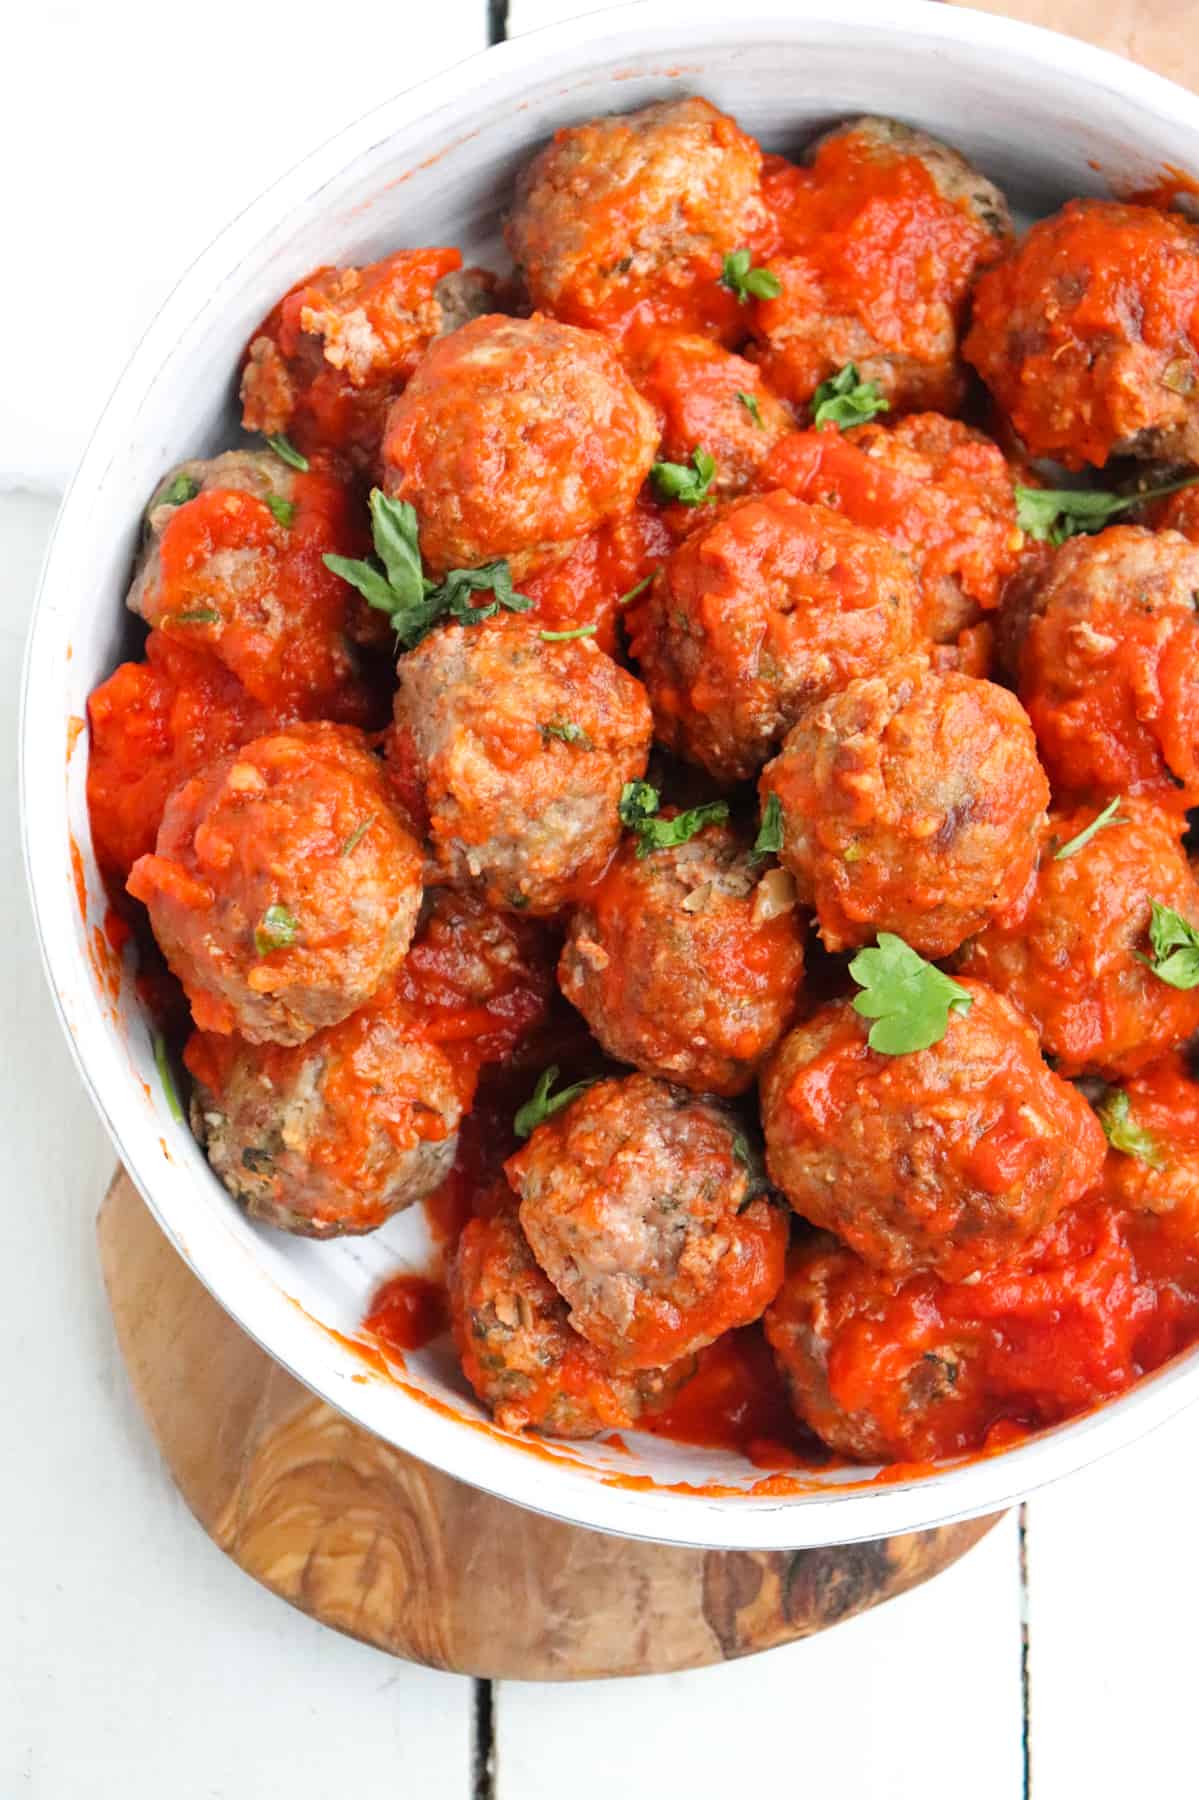 finished meatballs covered in sauce and topped with parsley in a white dish.